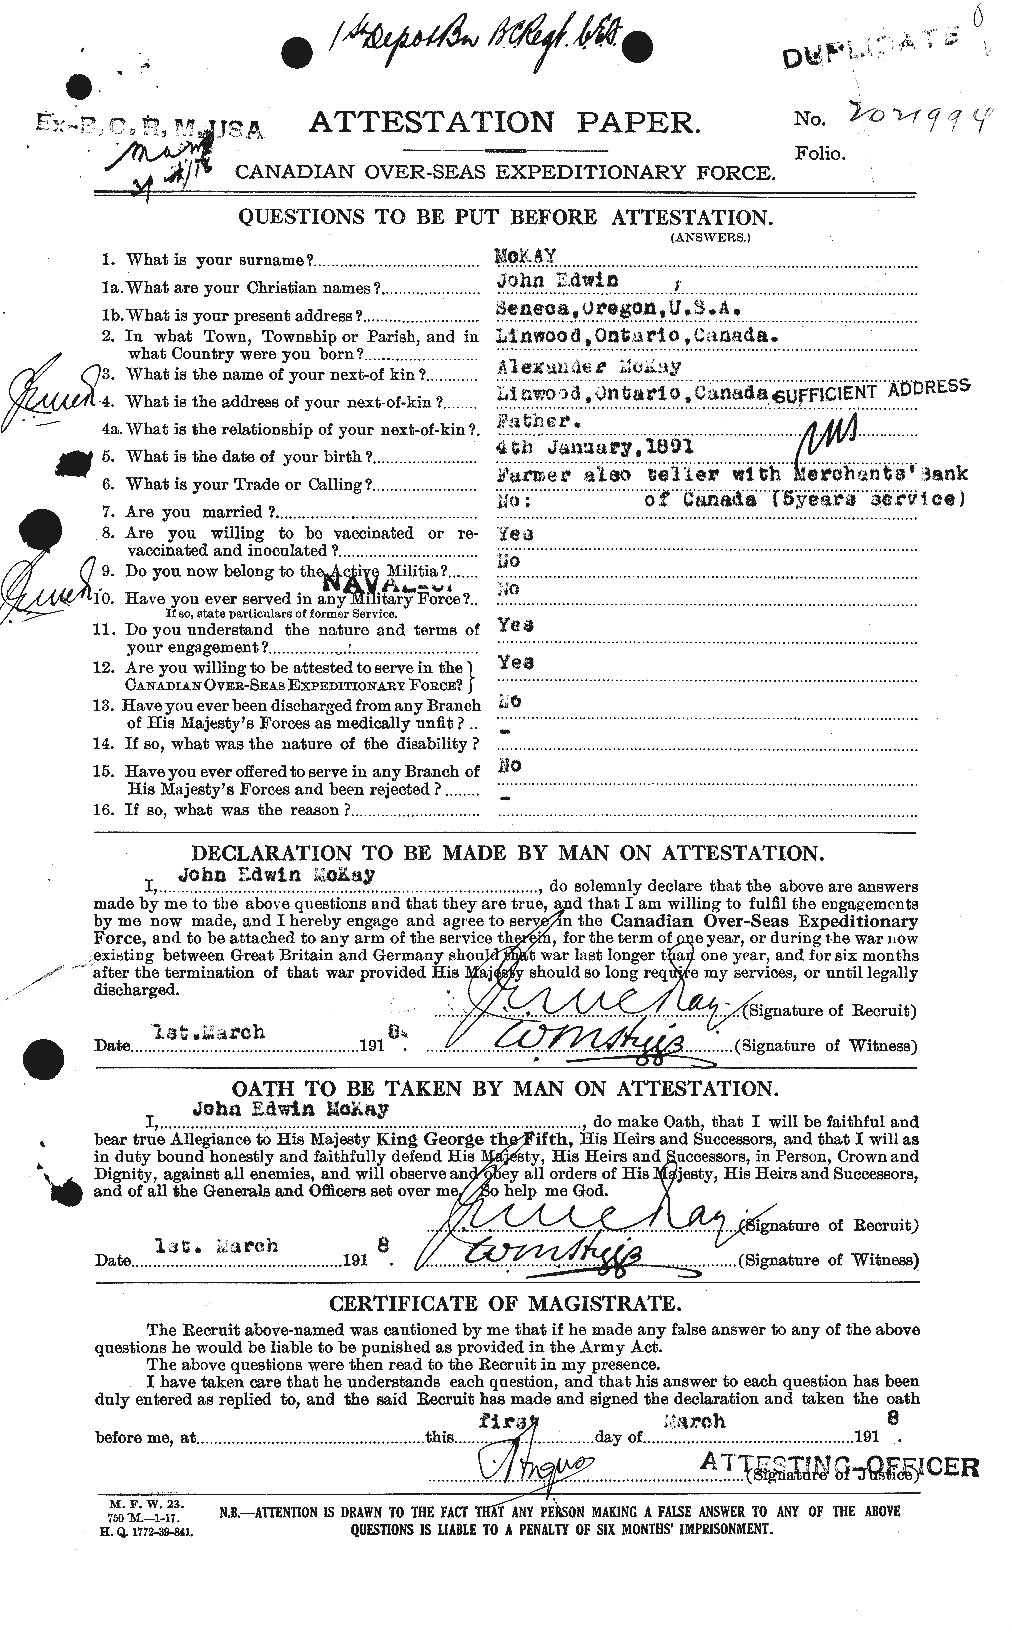 Personnel Records of the First World War - CEF 527049a